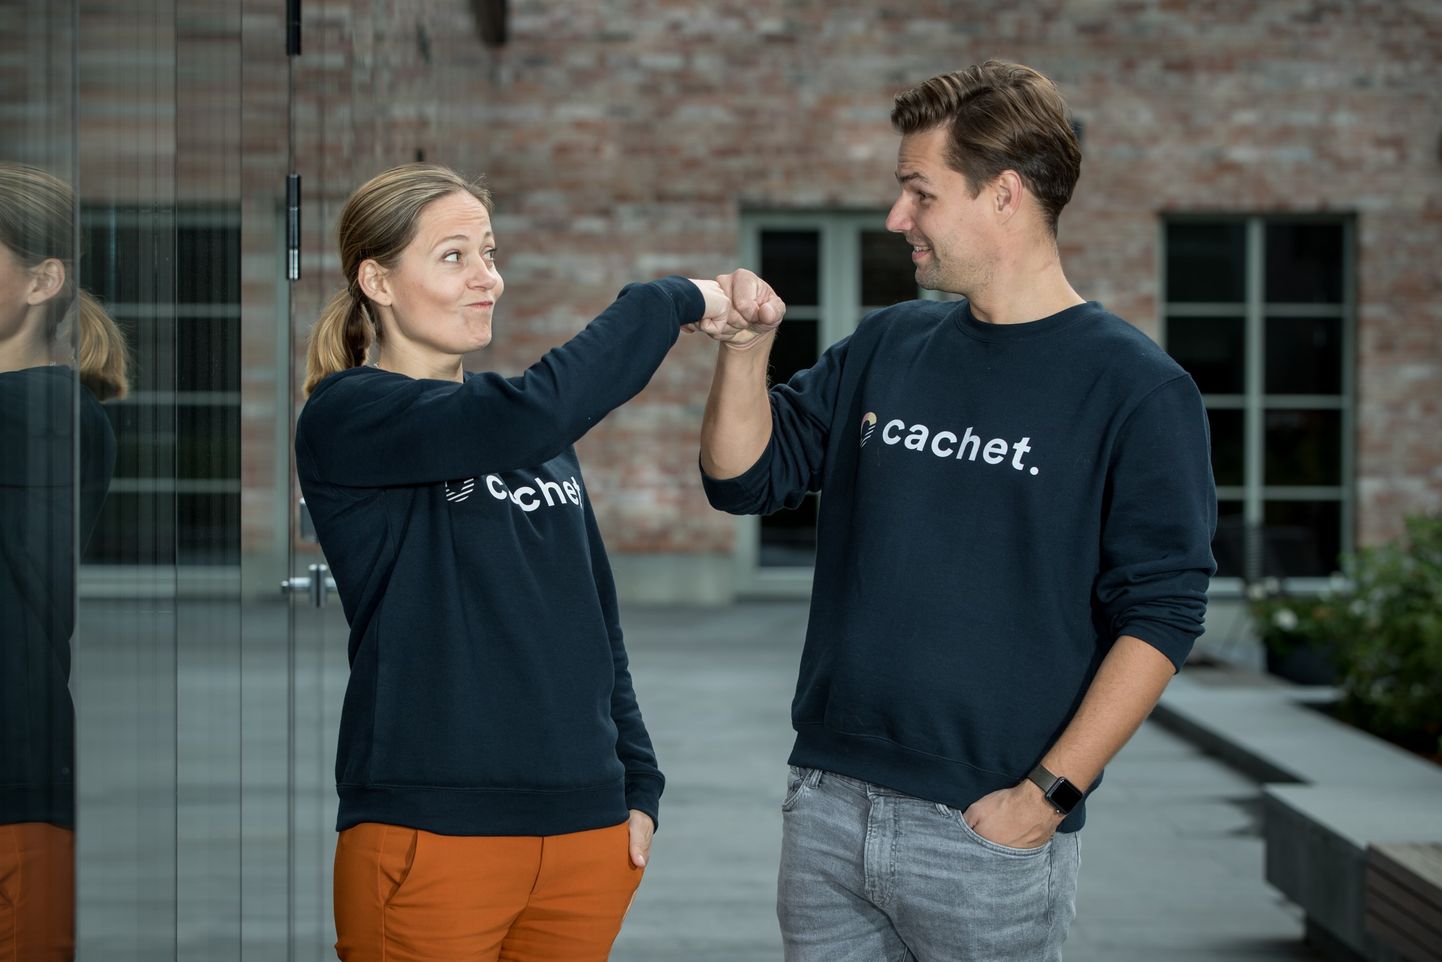 Cachet founders Hedi Mardisoo and Kalle Palling